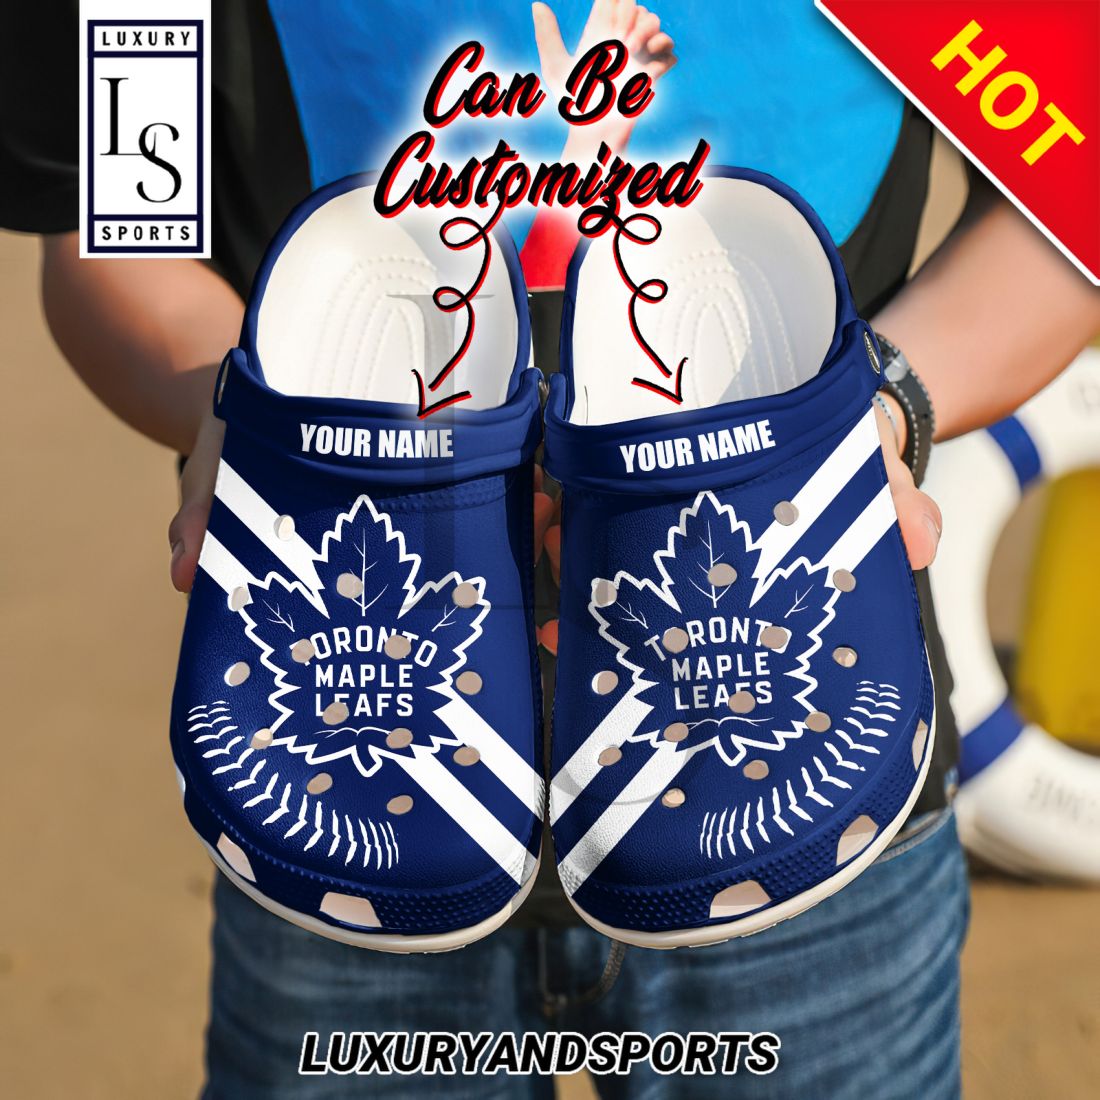 SALE] Personalized Toronto Maple Leafs Crocs Clogs shoes - Luxury & Sports  Store